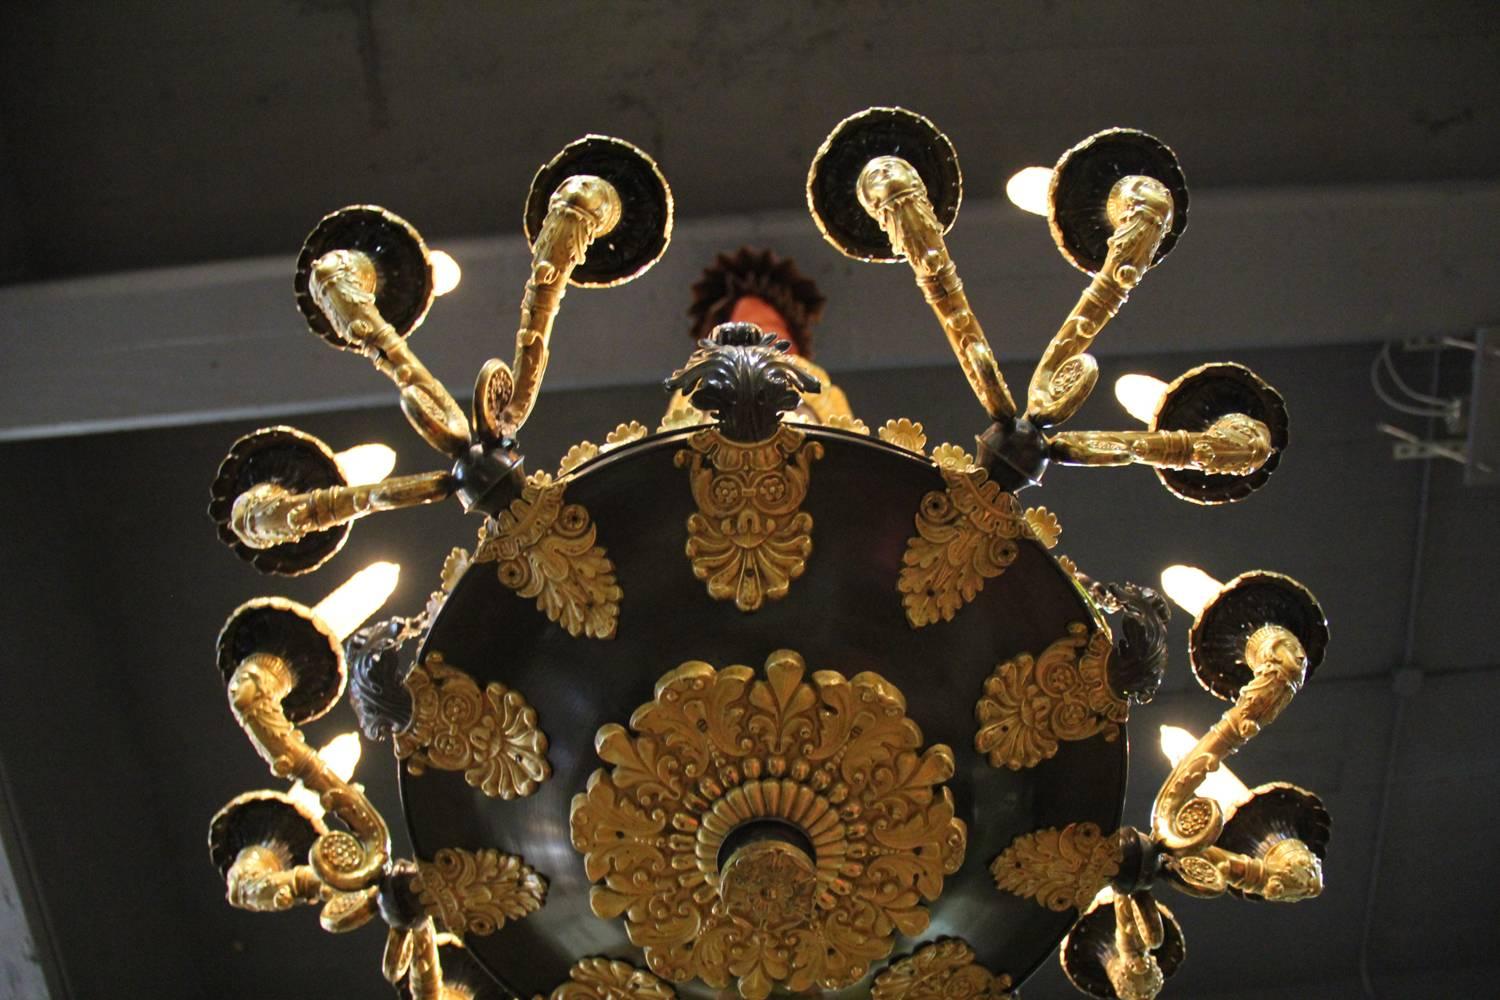 A 19th century gilt bronze French Charles X fifteen-light chandelier, with a carved canopy above a tent of five suspending "cables" and supporting the fifteen masked and scrolling candle arms emerging from the bronze bowl, accented with